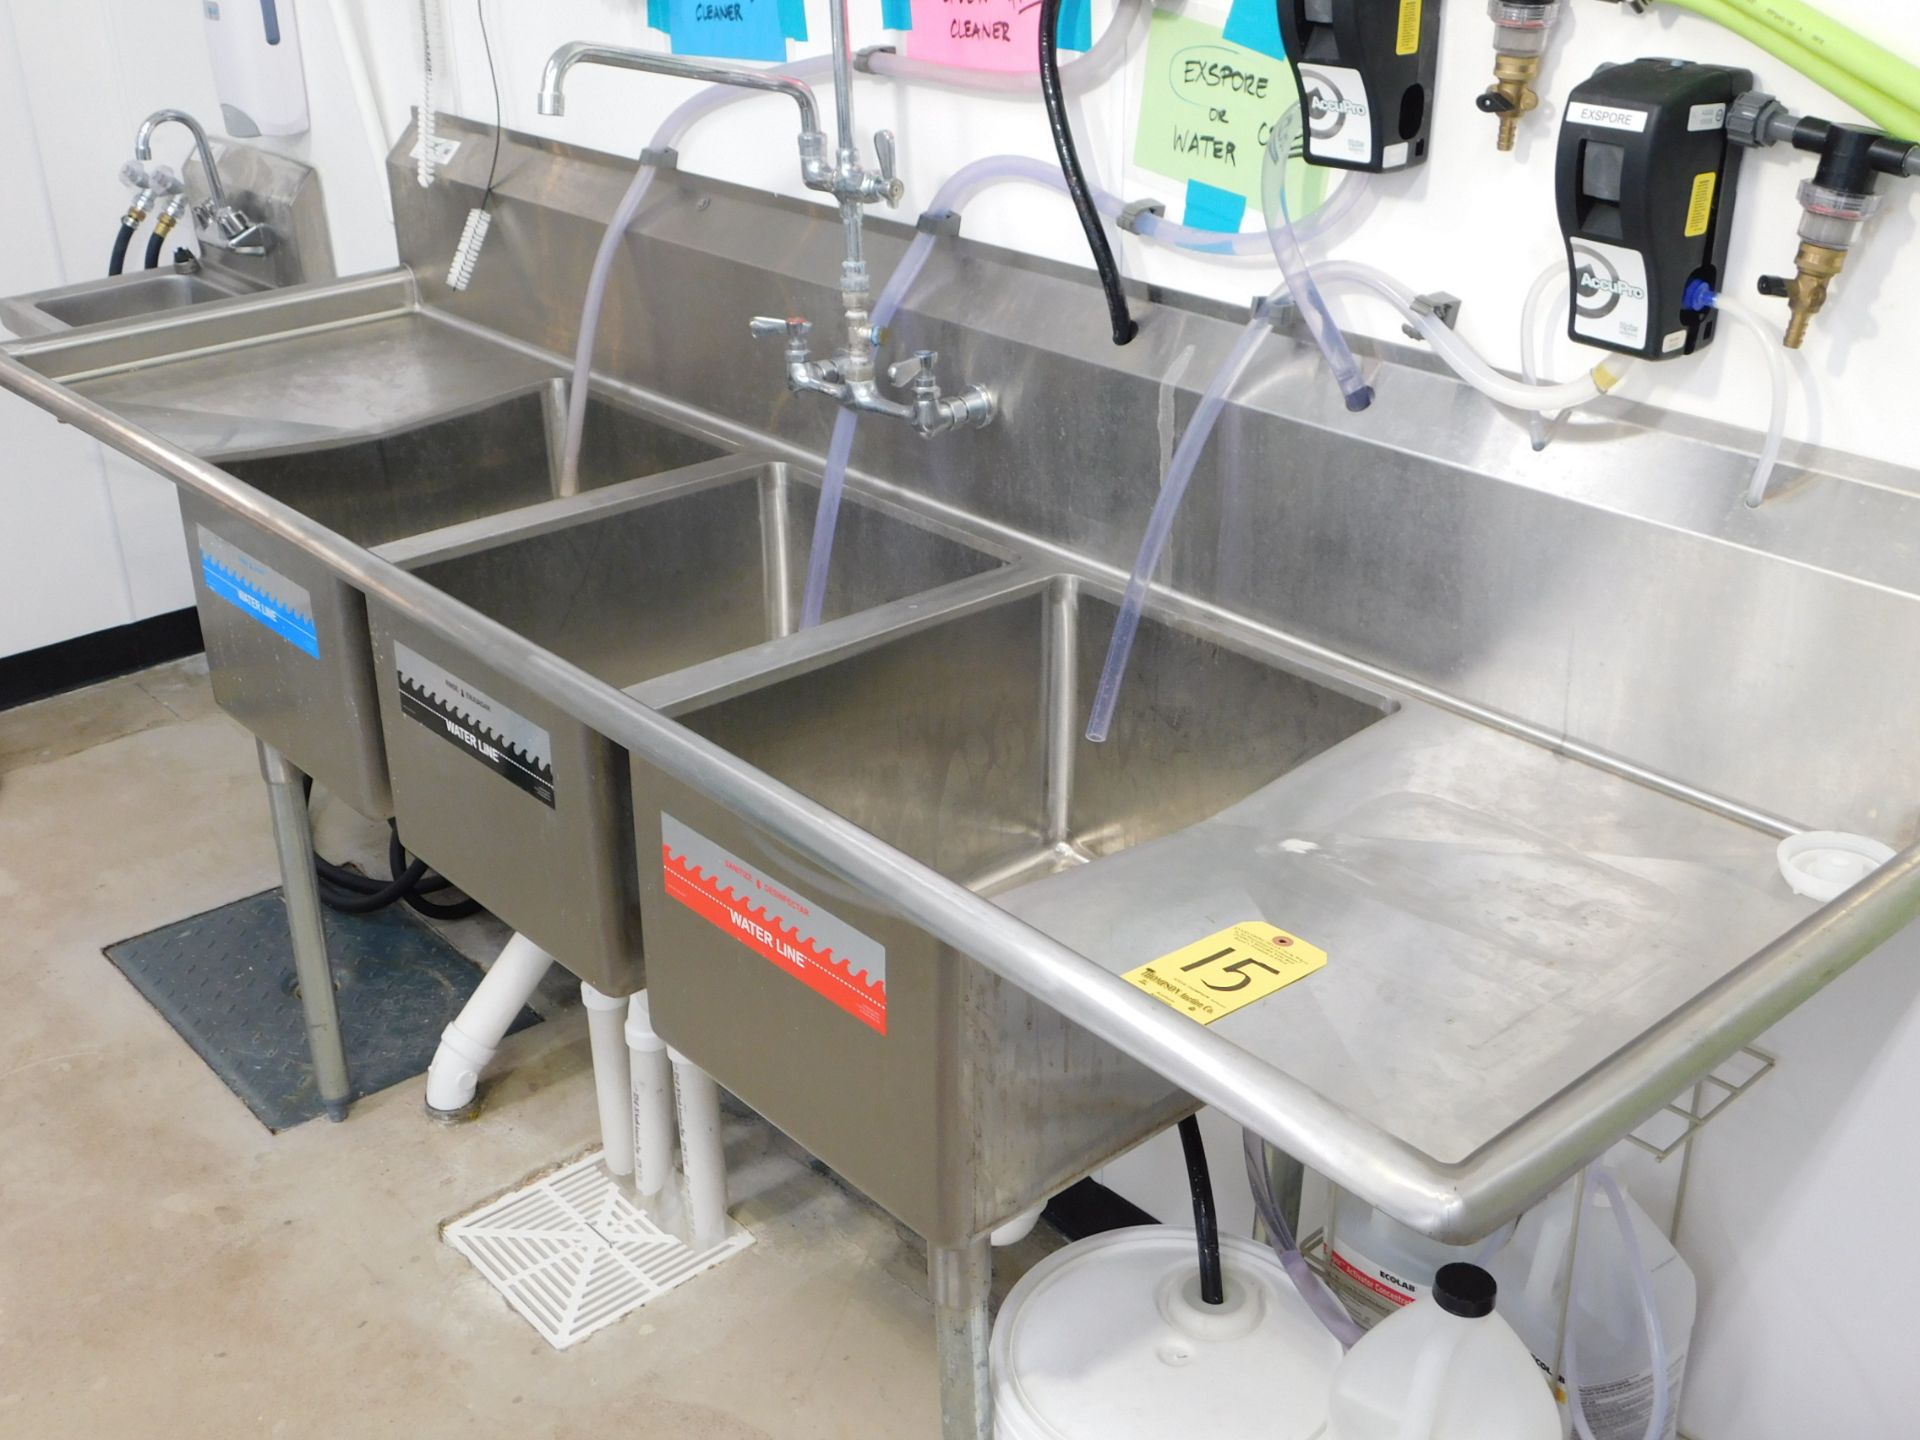 Three Bay Stainless Sink,, 80" Lx 26" W x 37" T, with Faucets and Hoses